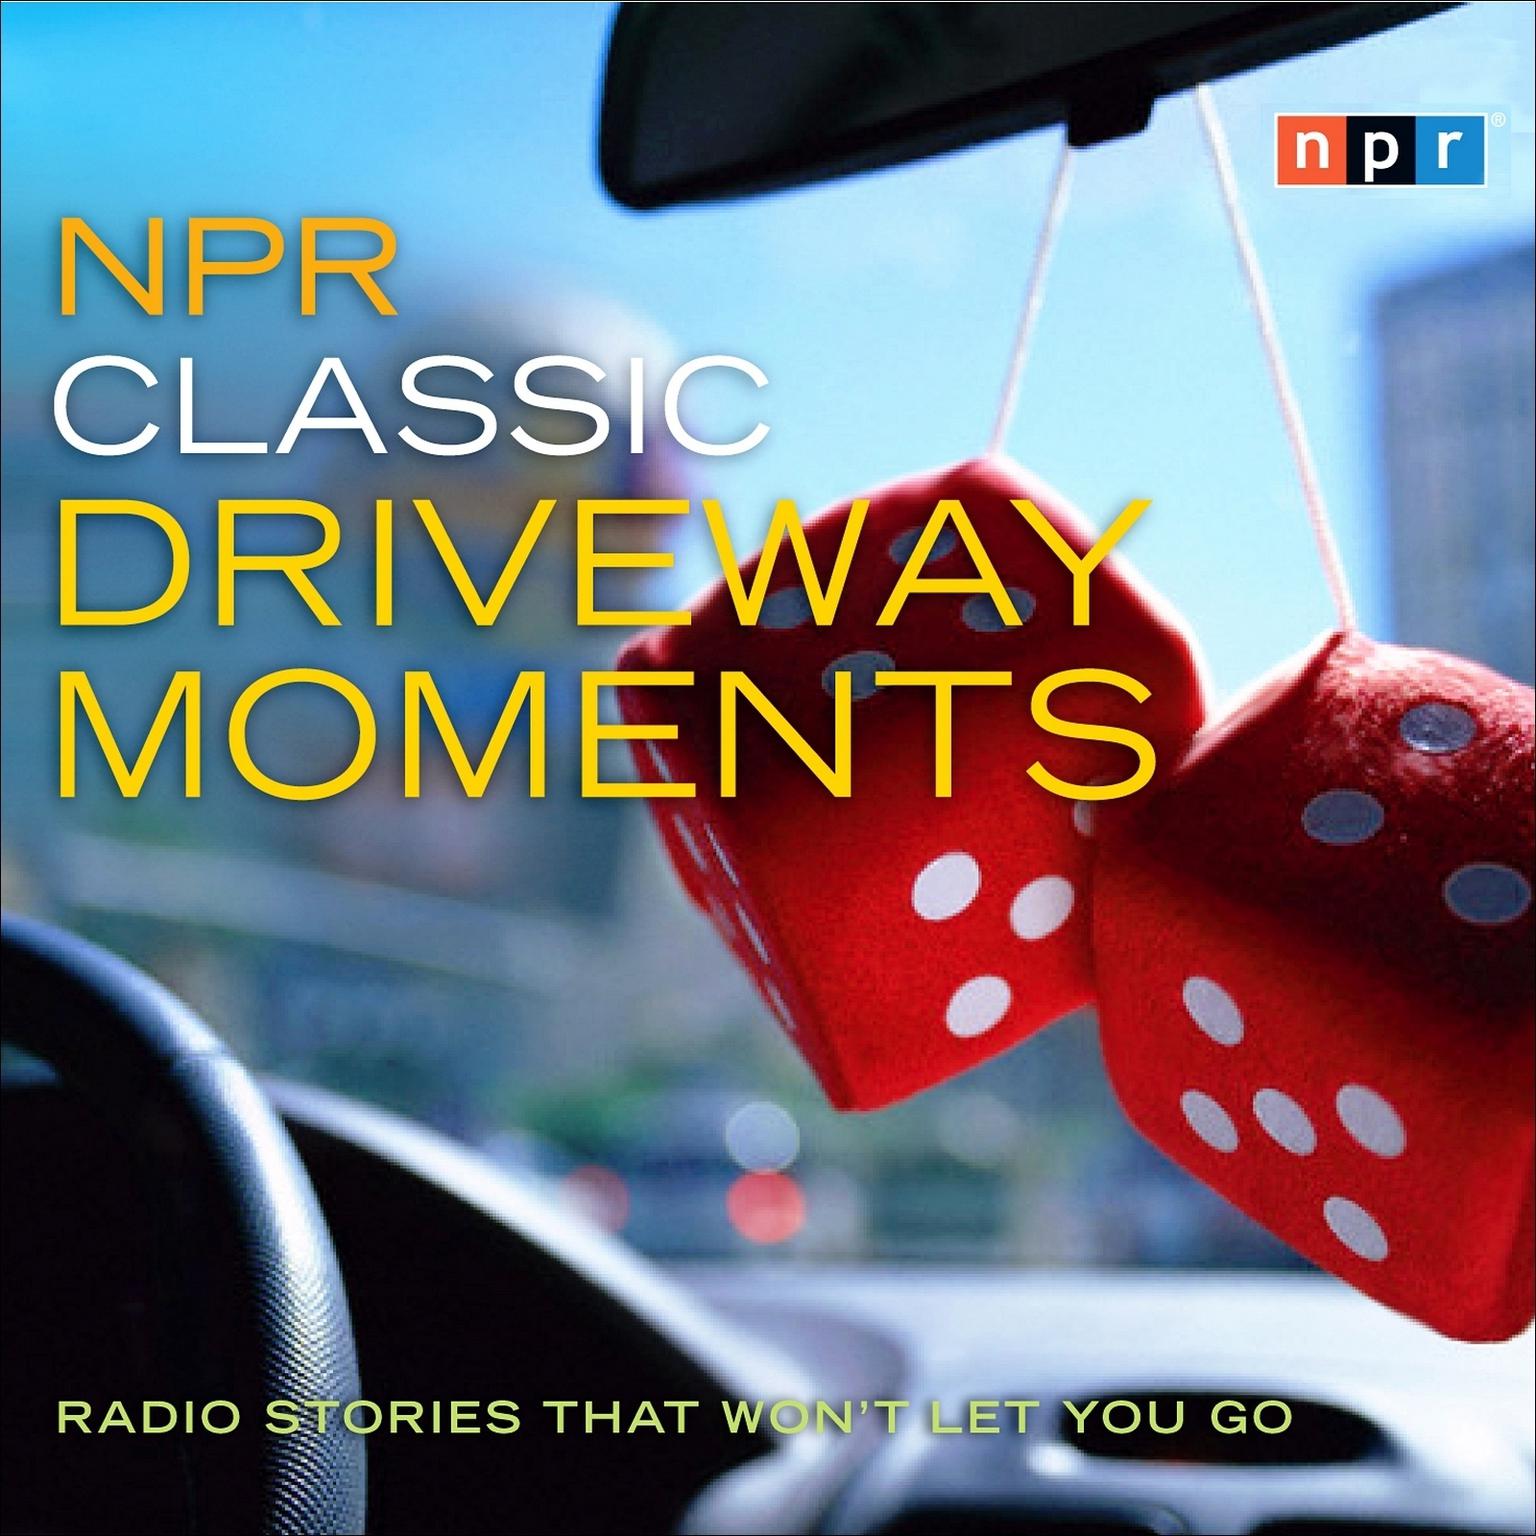 NPR Classic Driveway Moments: Radio Stories that Wont Let You Go Audiobook, by NPR